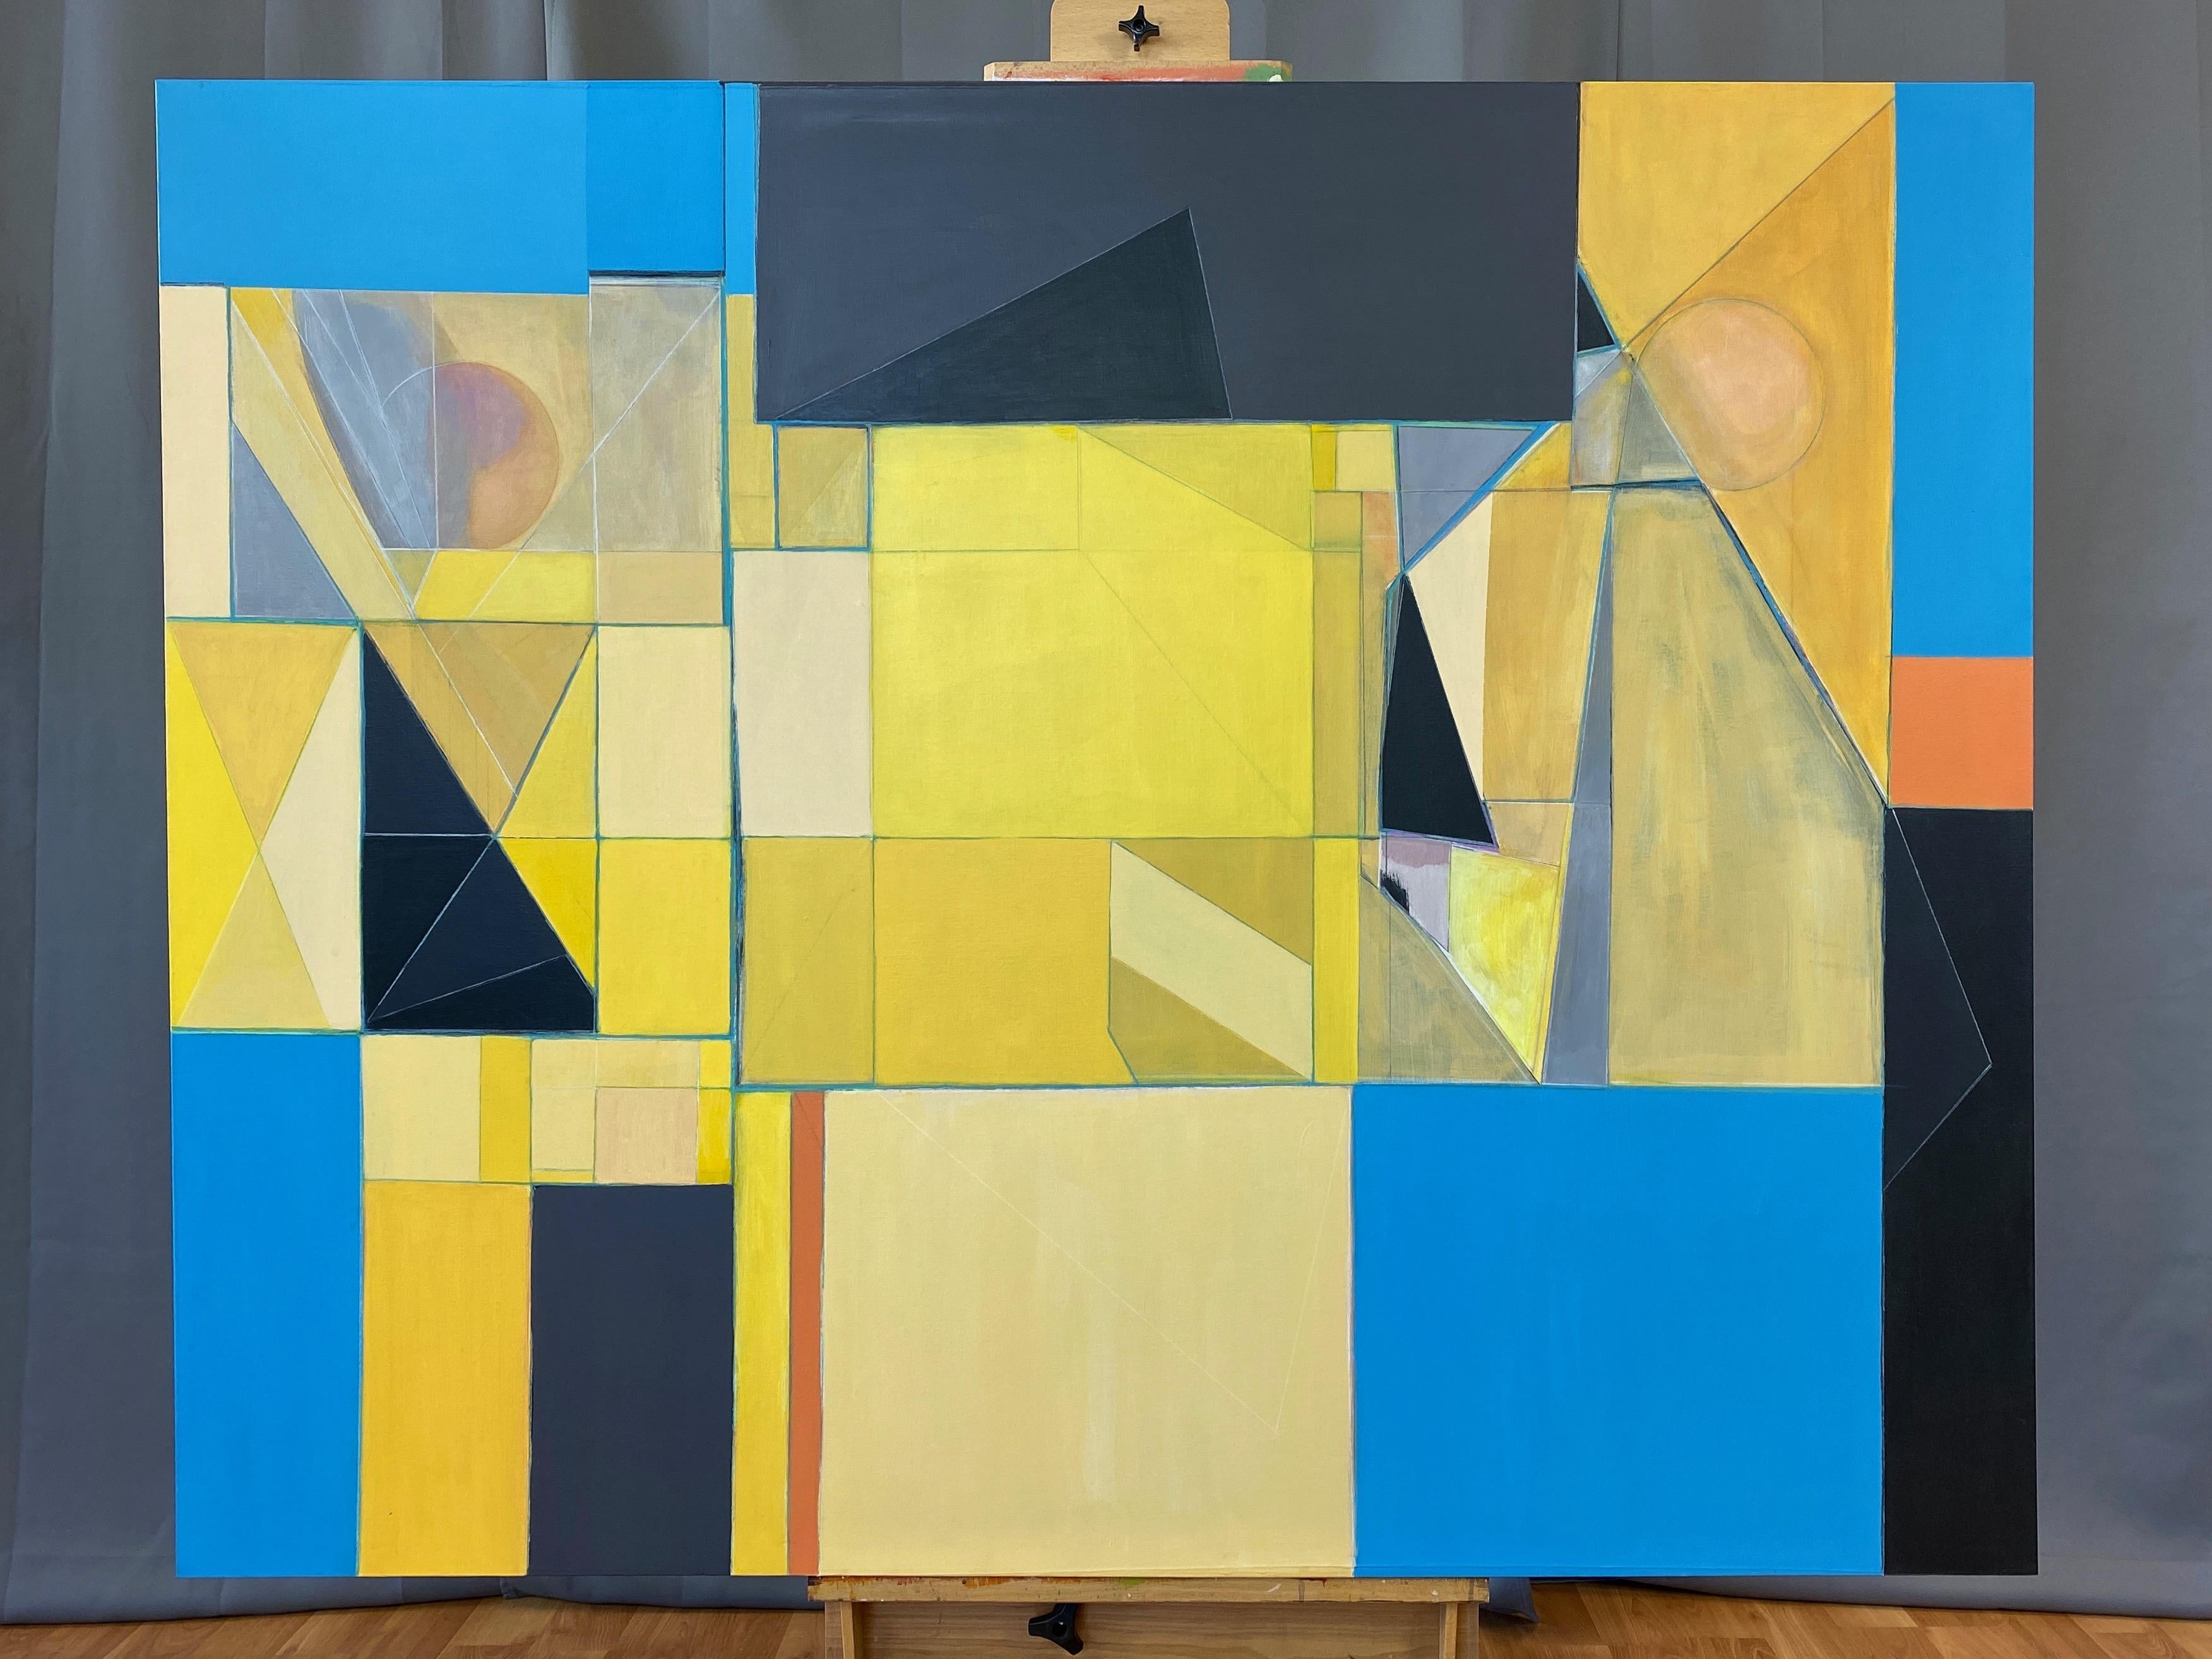 A very large and impactful mid-1990s cubist style abstract expressionist acrylic painting titled “Etheric Double” by Robert English.

Crisply drafted lines meet and intersect to create a dynamic array of geometric forms. Bright cerulean blue